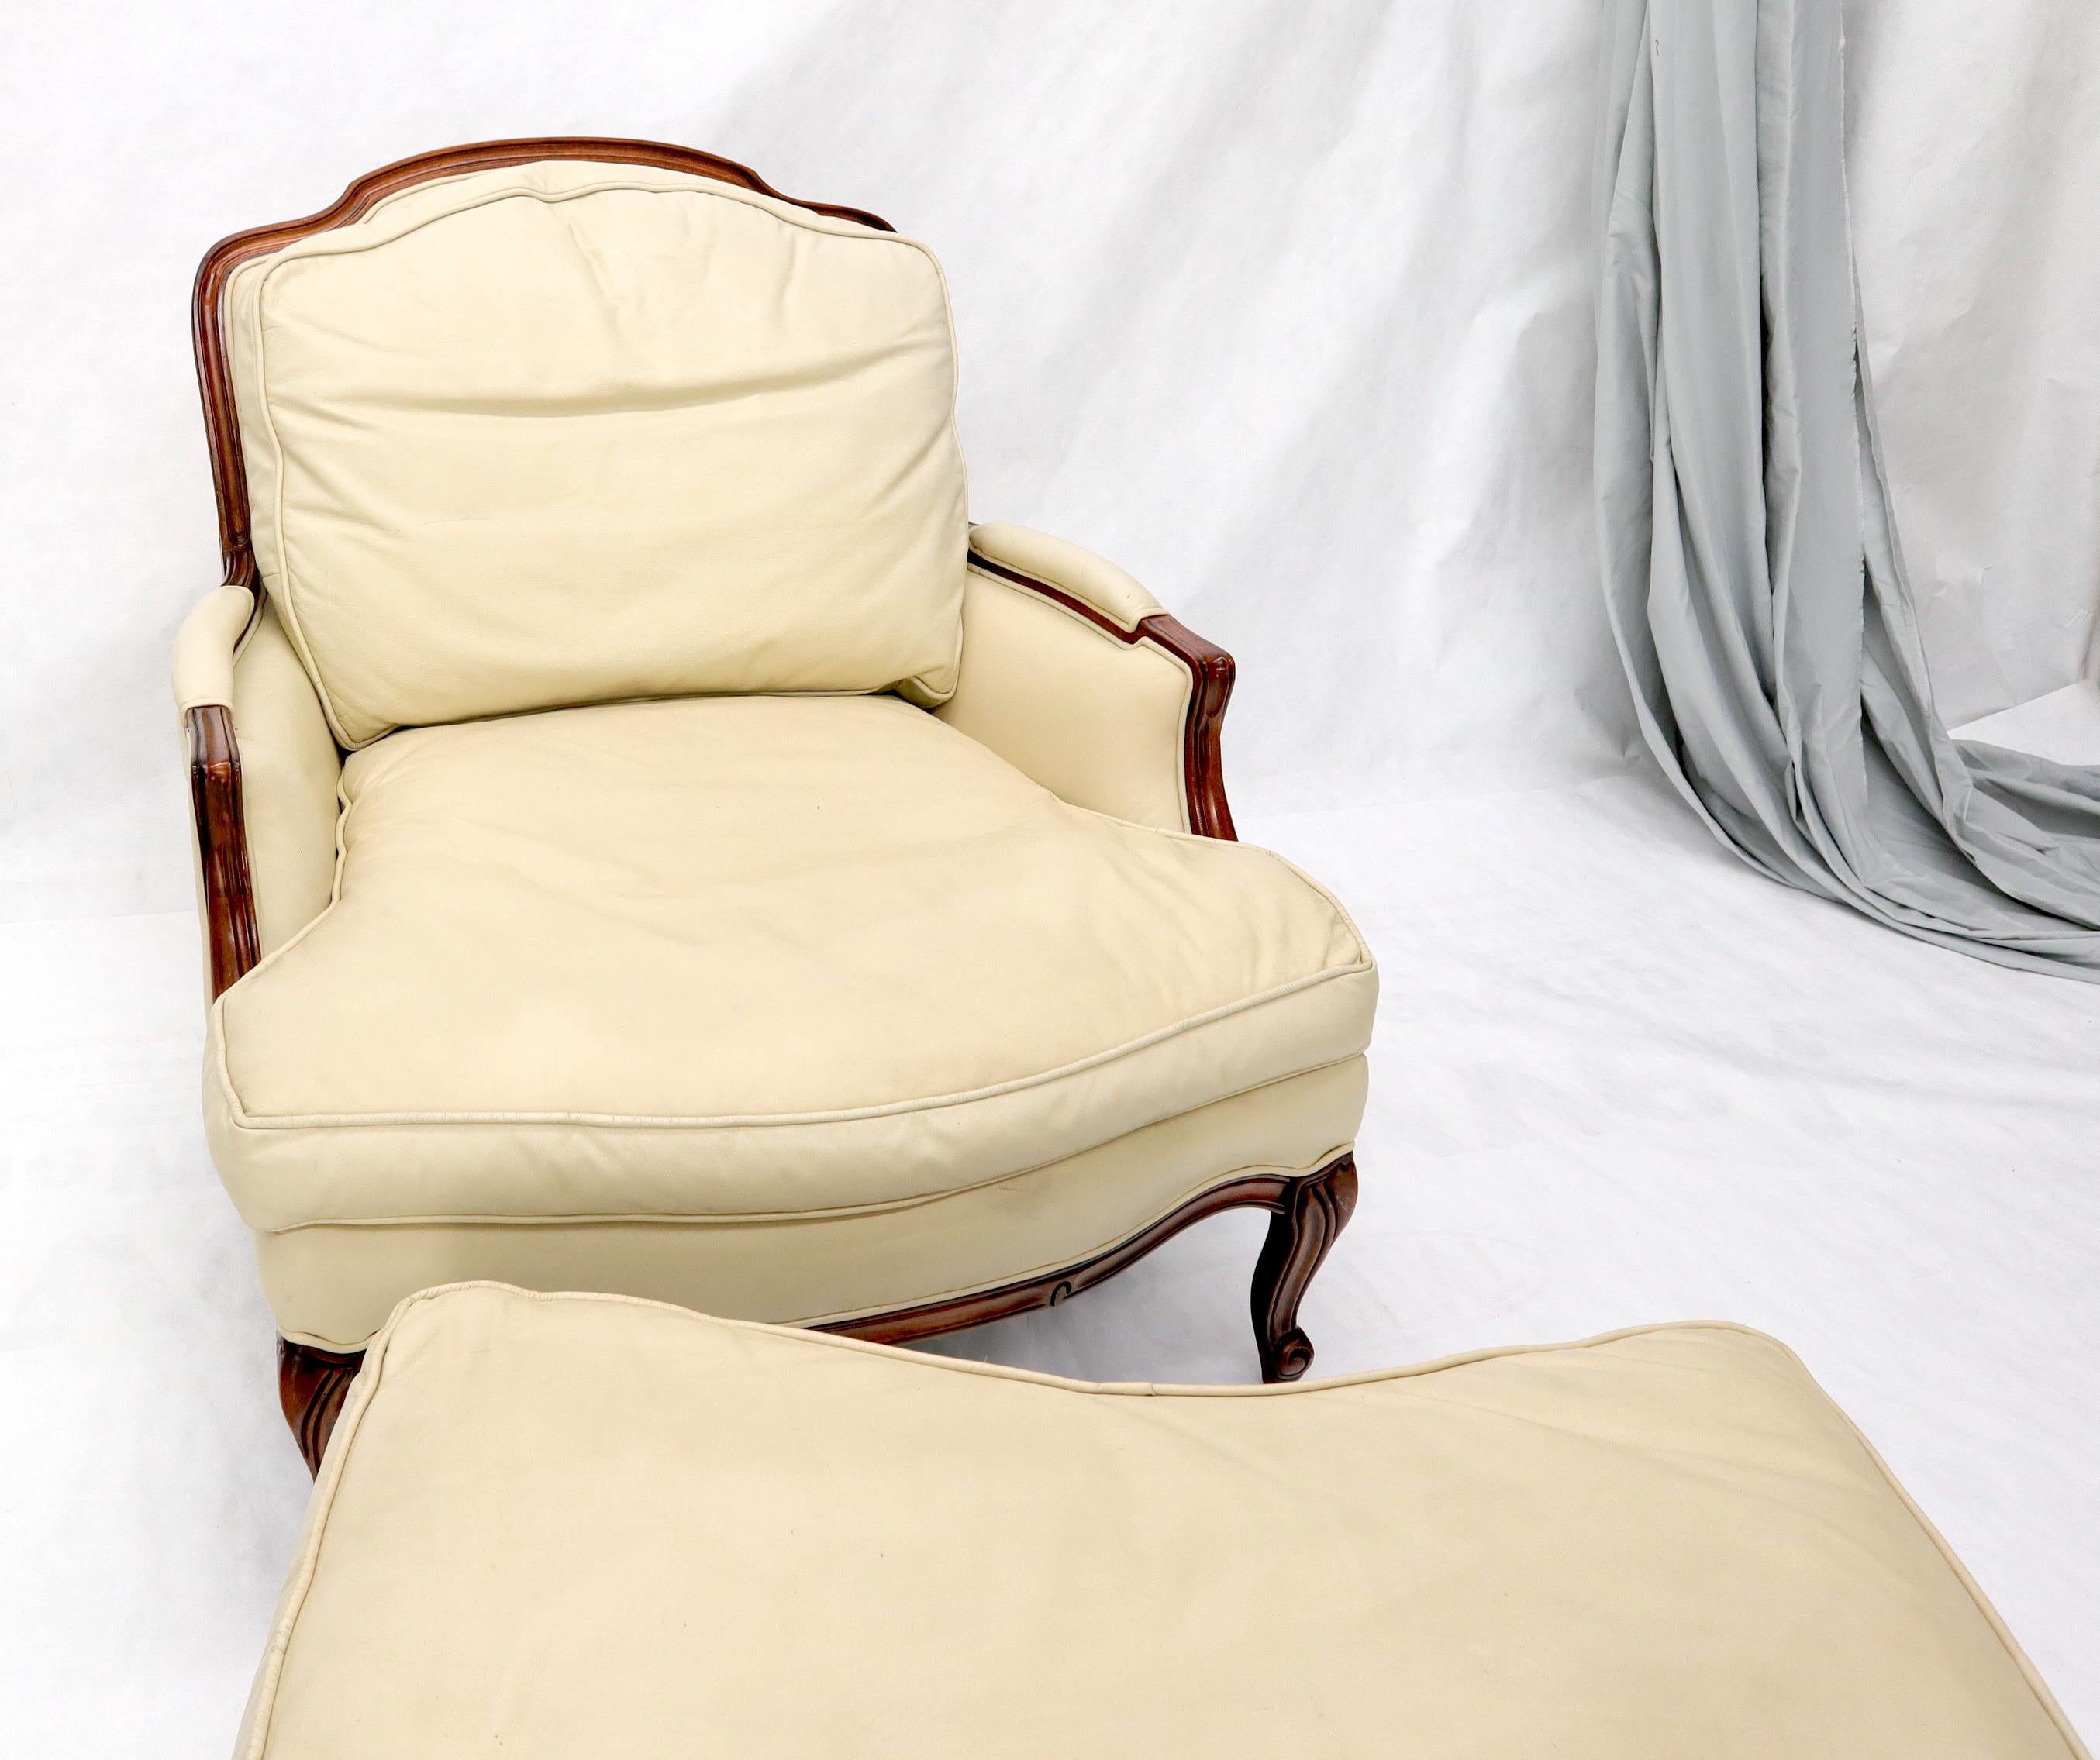 French Provincial Cream Leather Chaise 2-Part Chaise Lounge Chair and Ottoman